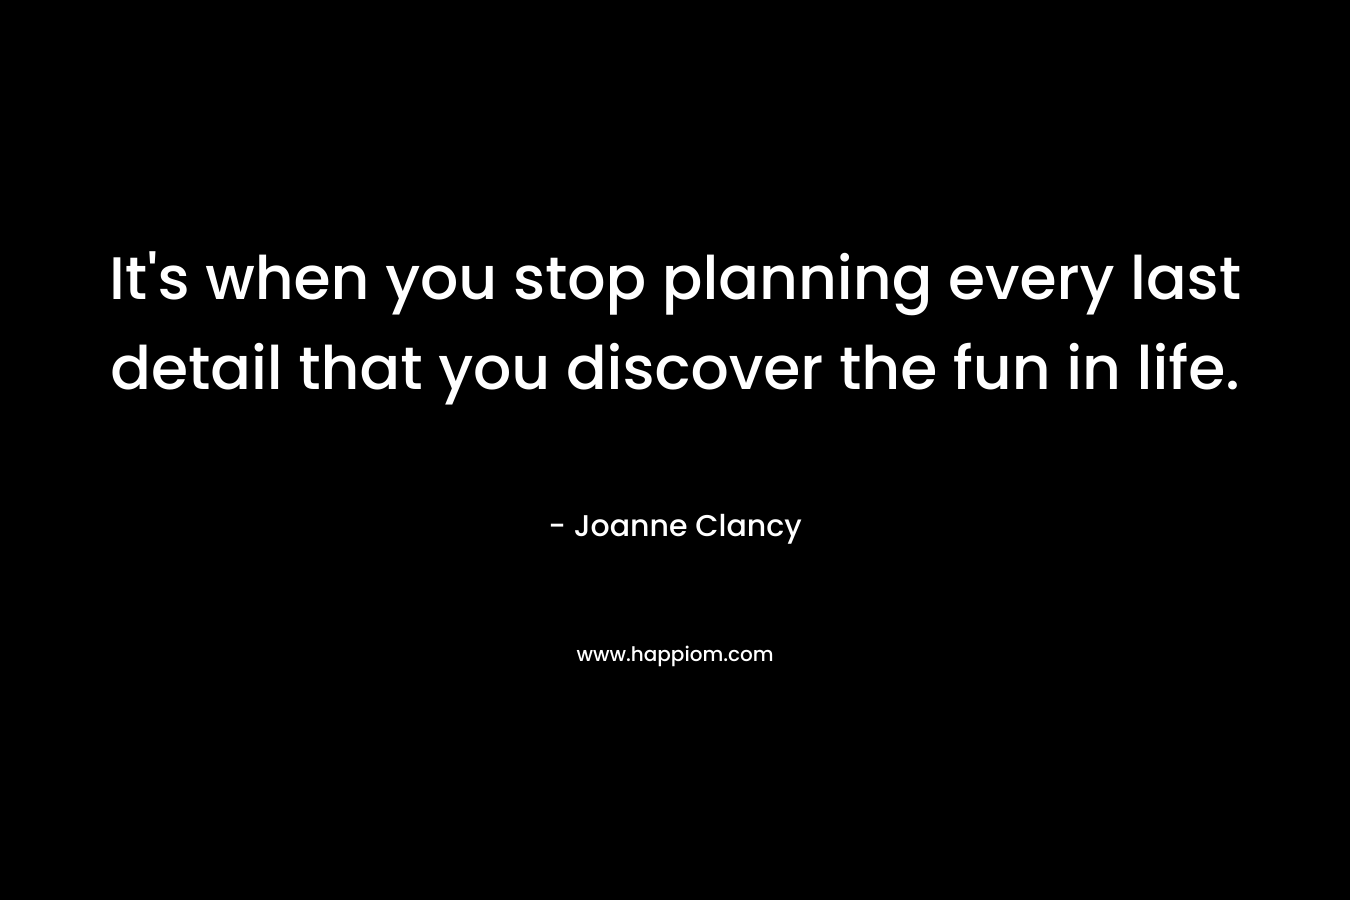 It’s when you stop planning every last detail that you discover the fun in life. – Joanne Clancy